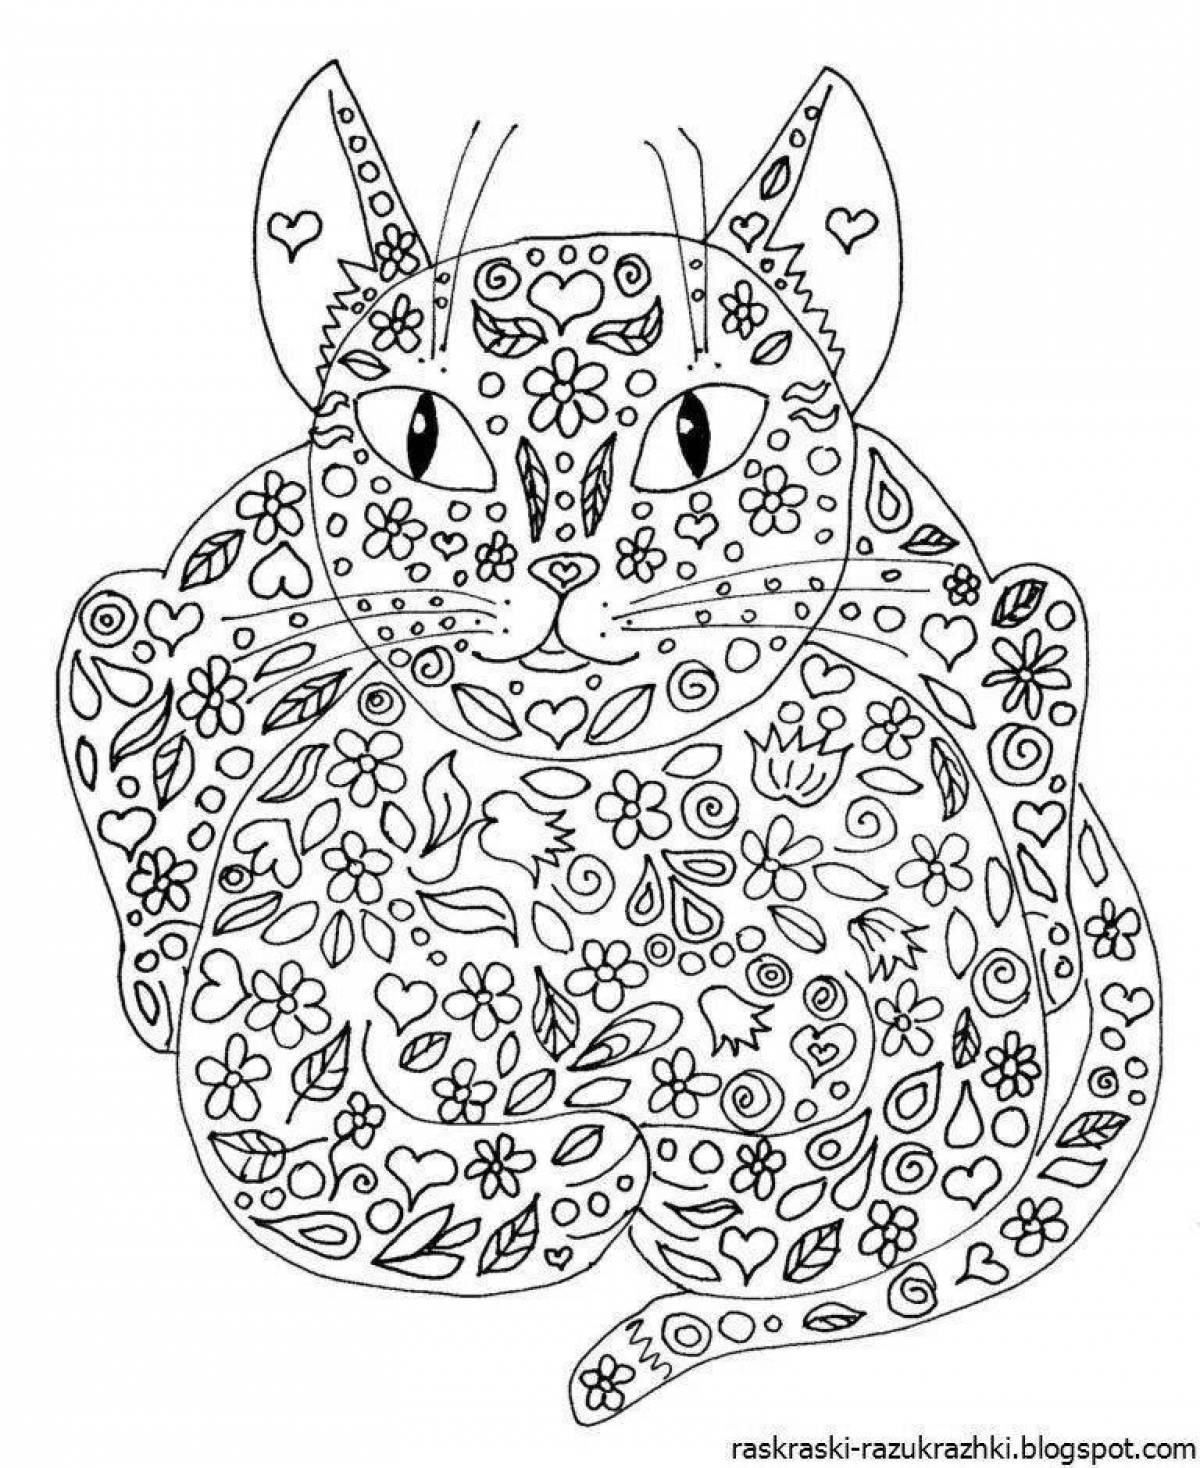 Coloring pages of complex cats